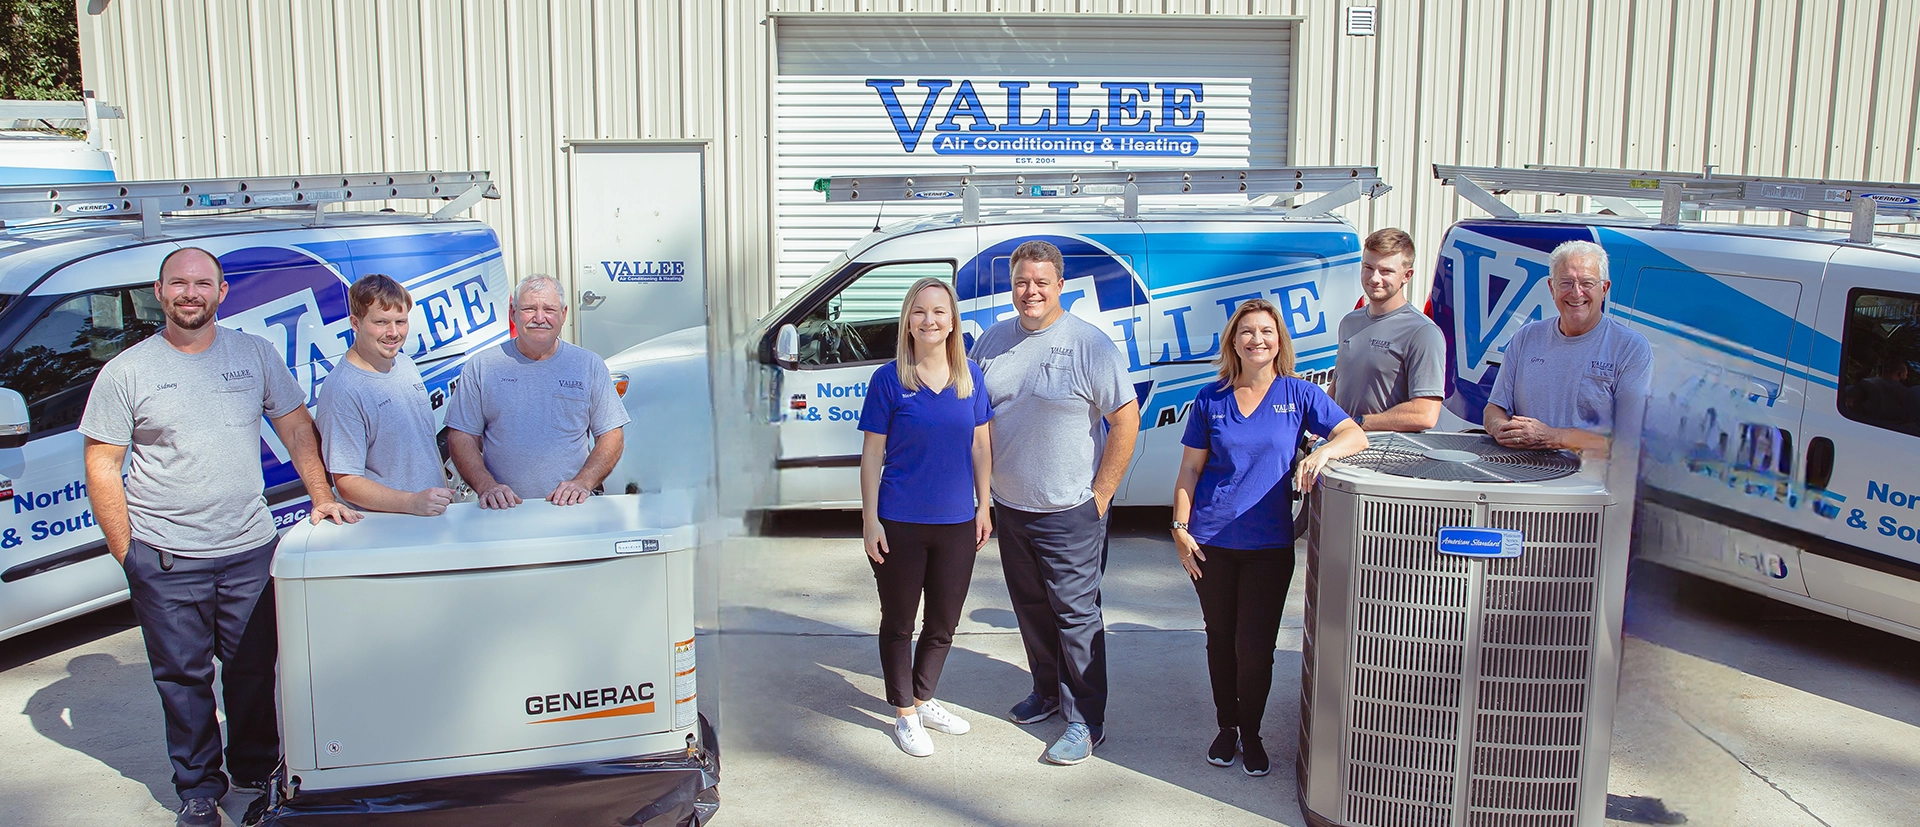 Vallee Air Conditioning & Heating Team